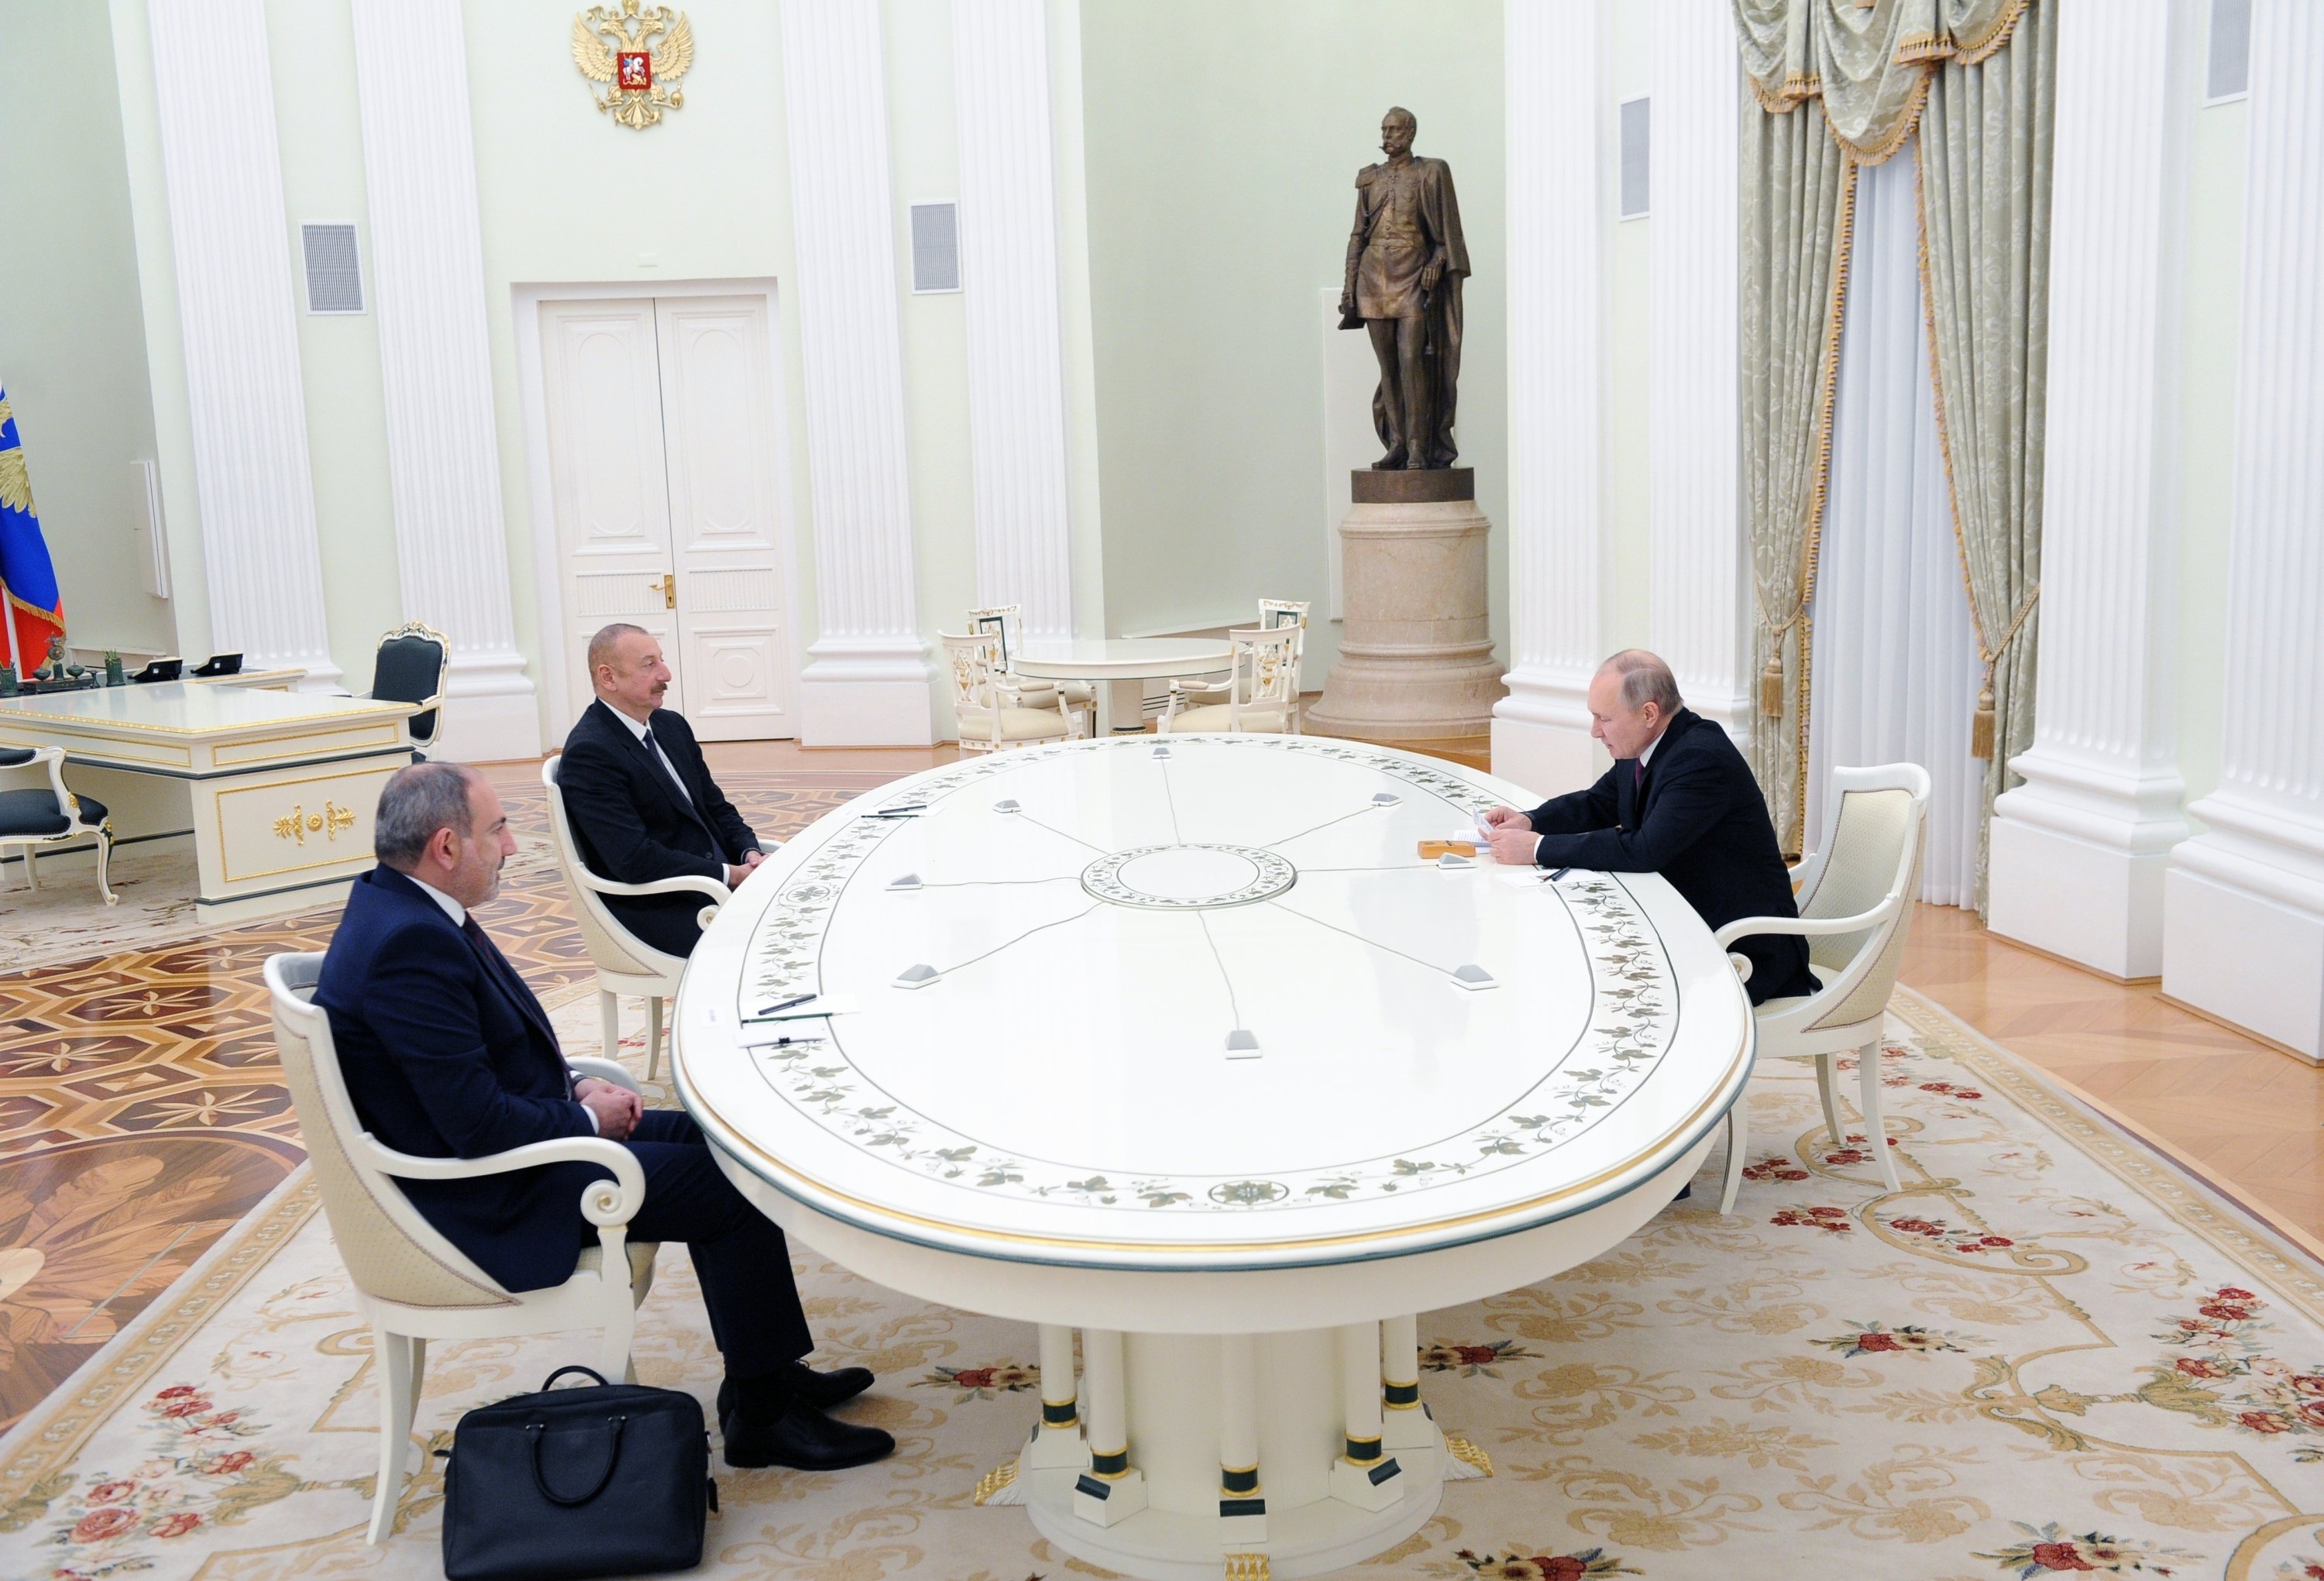 In The Caucasus Turkey And Russia, 3 Round Table Conference Attended By Presidents